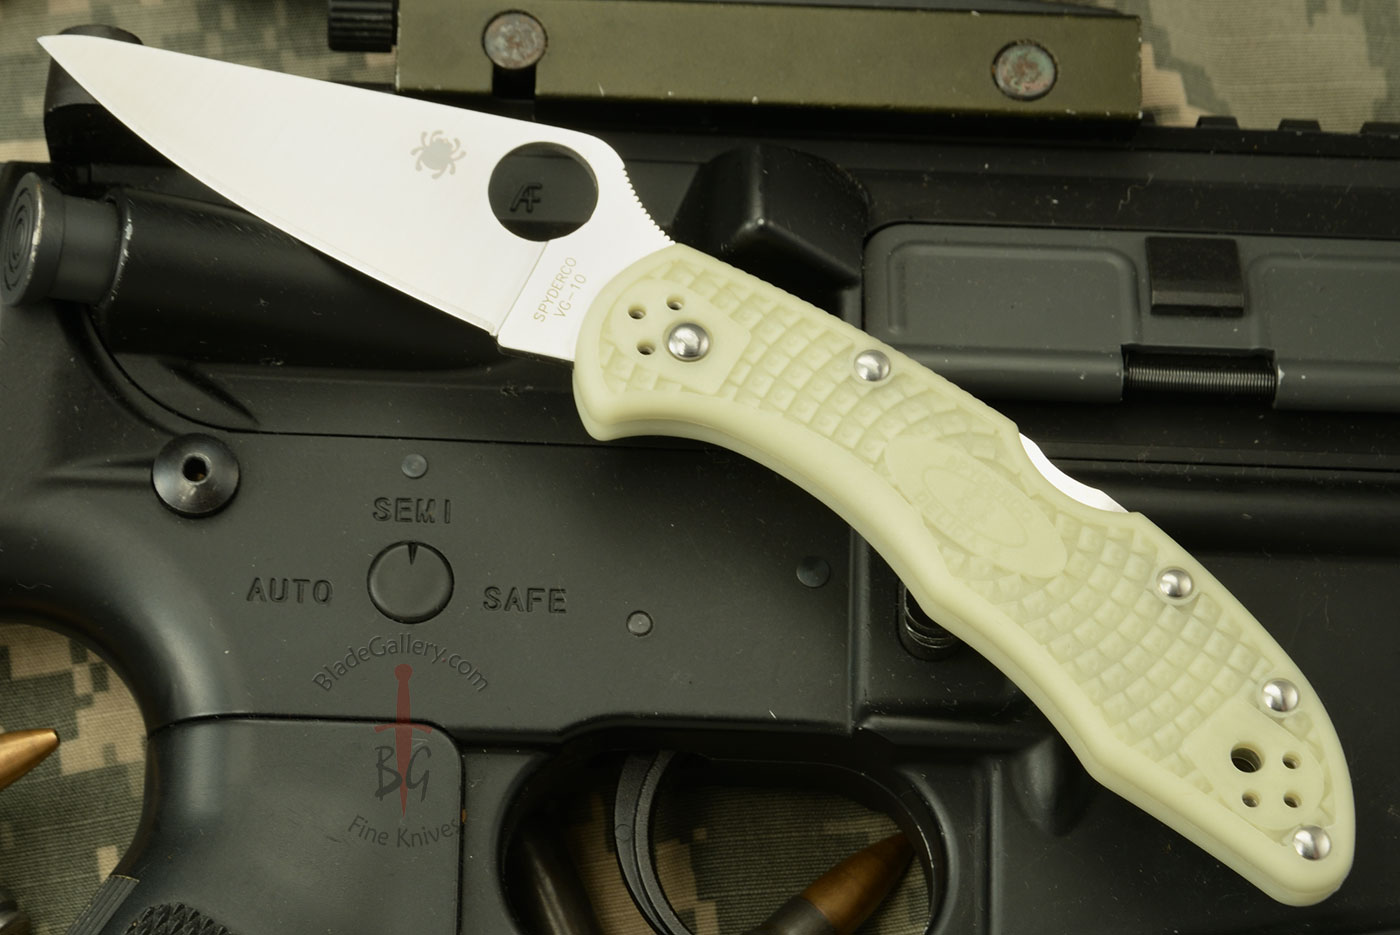 Delica 4 with VG10 and Glow in the Dark FRN (C11FPGITD)